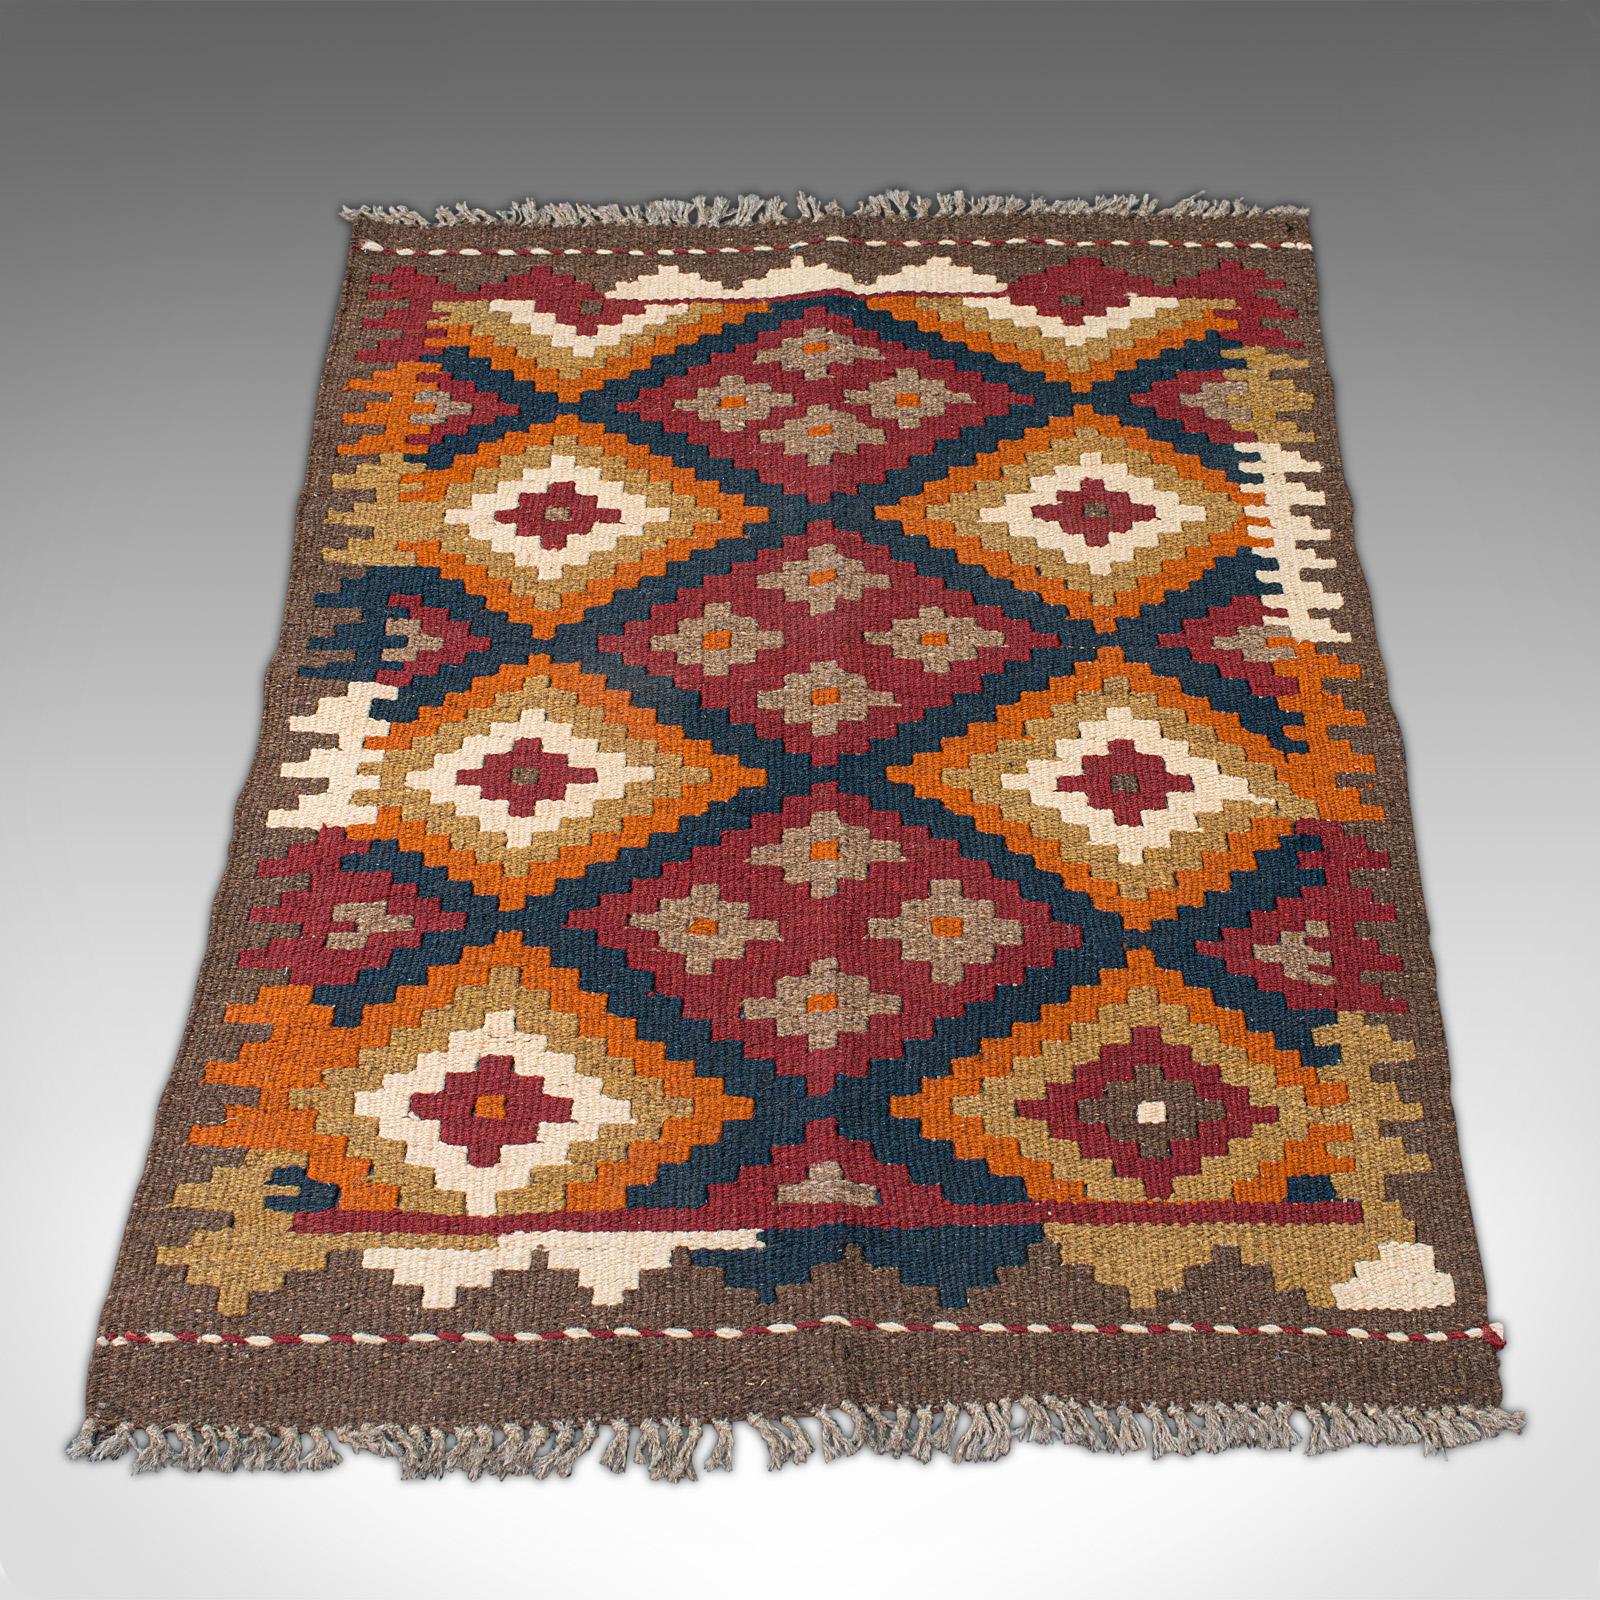 This is a small vintage Maimana Kilim rug. A Caucasian, woven decorative carpet or mat, dating to the late 20th century.

Delightfully sized for a prayer mat or doorway at 63.5cm (25'') x 92cm (36.25'')
Artisan hand-crafted using traditional